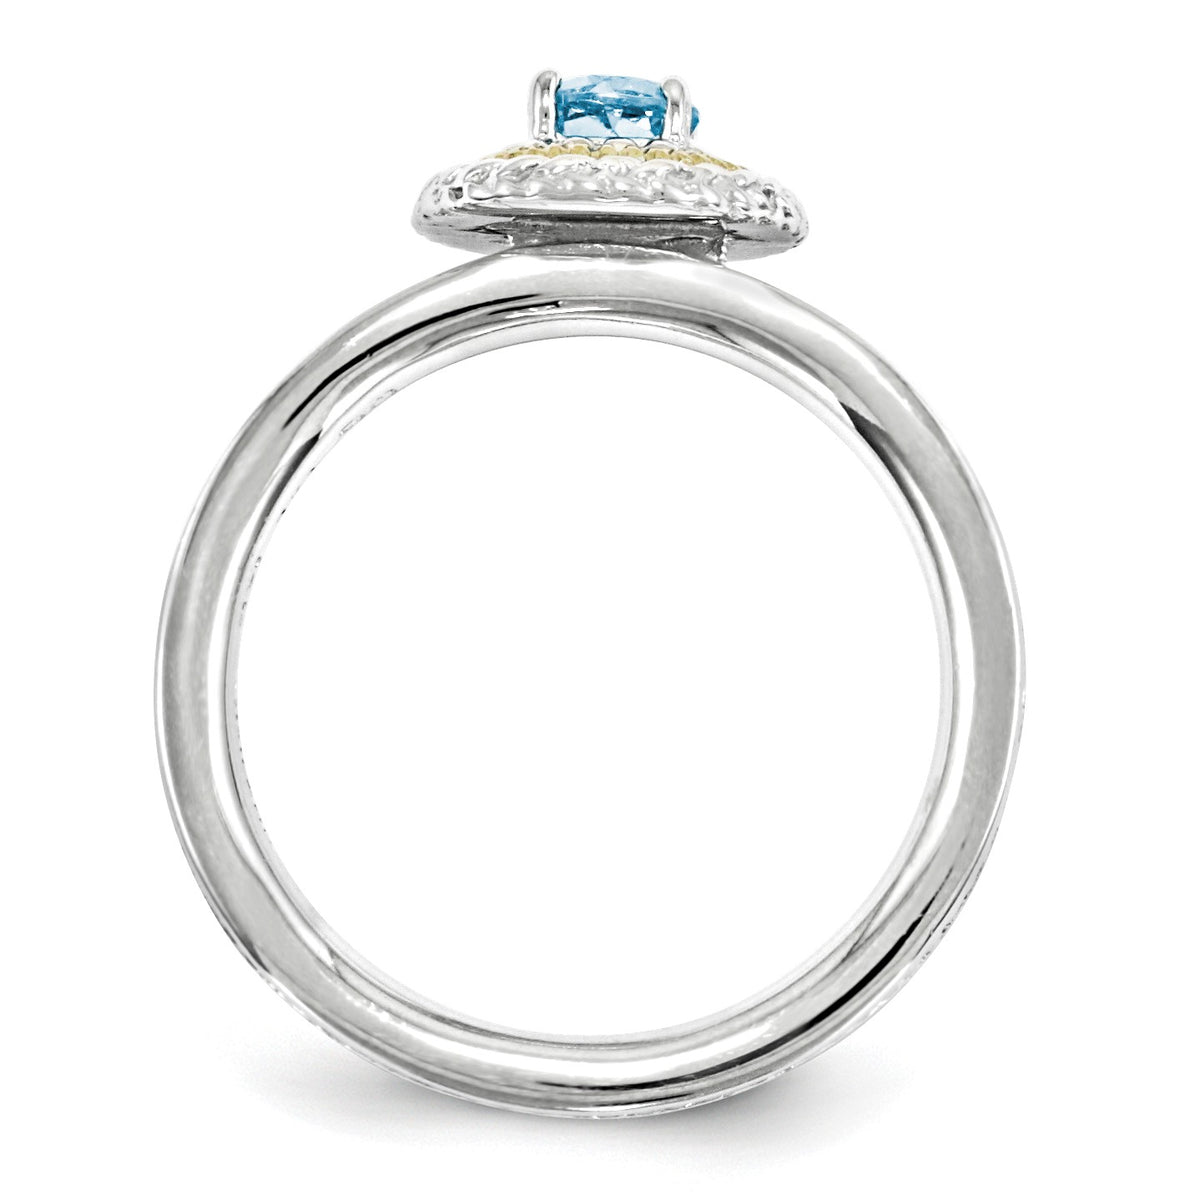 Alternate view of the Sterling Silver &amp; 14K Gold Plated Stackable Blue Topaz Ring by The Black Bow Jewelry Co.